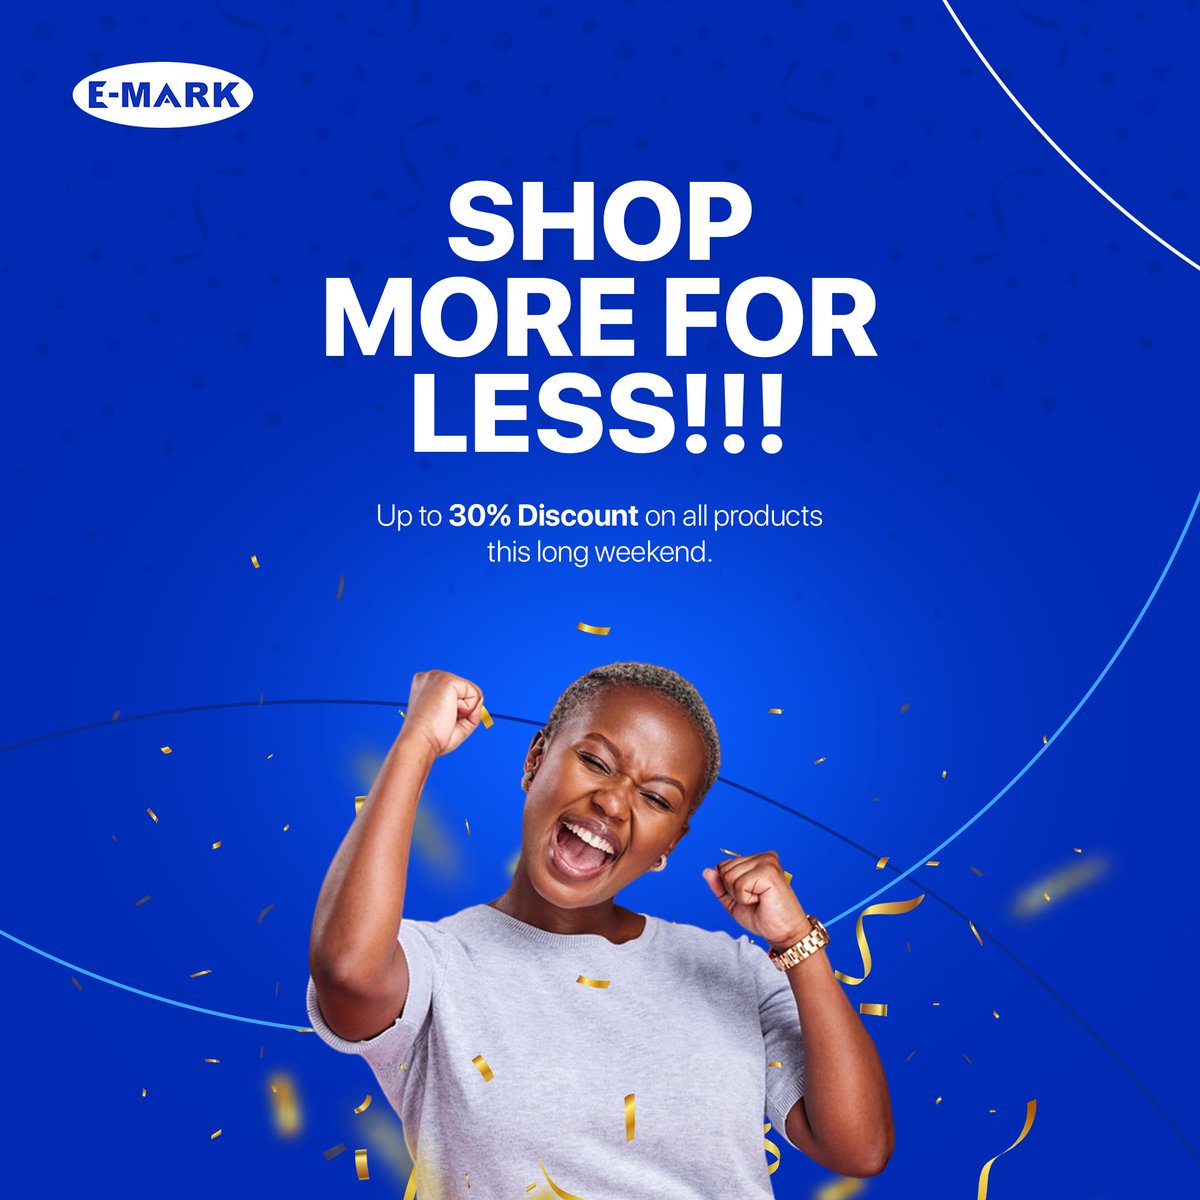 Enjoy Massive Discounts Of Up To 30% On All Products This Long Weekend!

#MoreForLess
#LongWeekend
#MassiveDiscounts
#ConnectingPeople